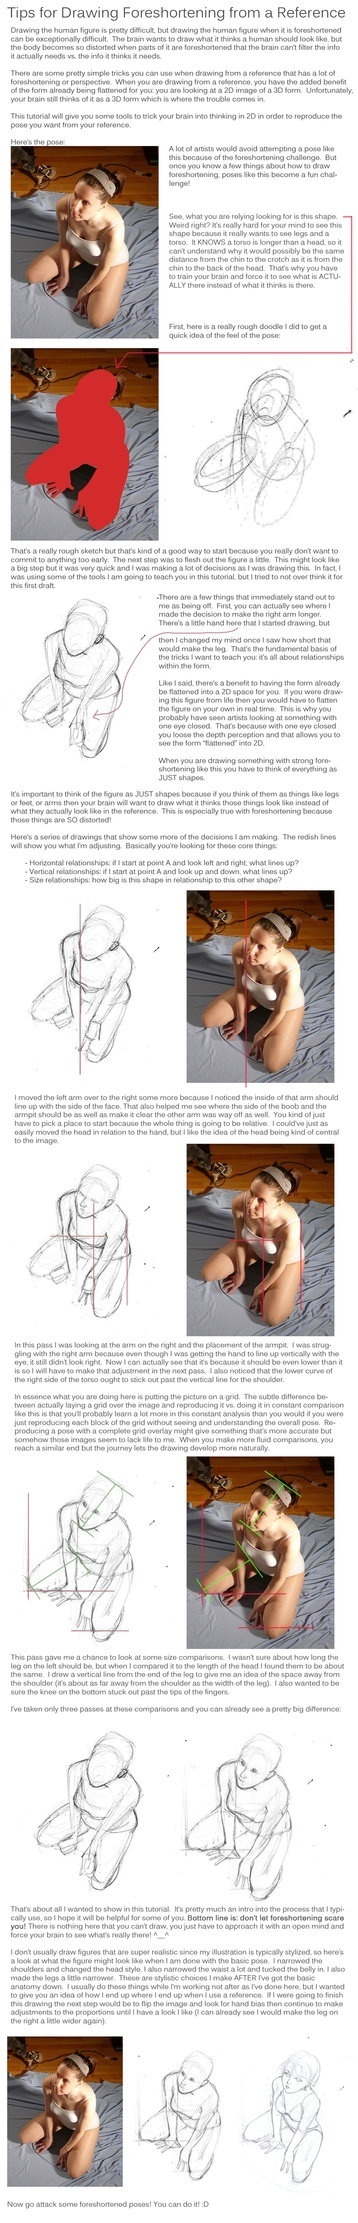 Foreshortening Drawing Reference Guide | Drawing References and Resources | Scoop.it